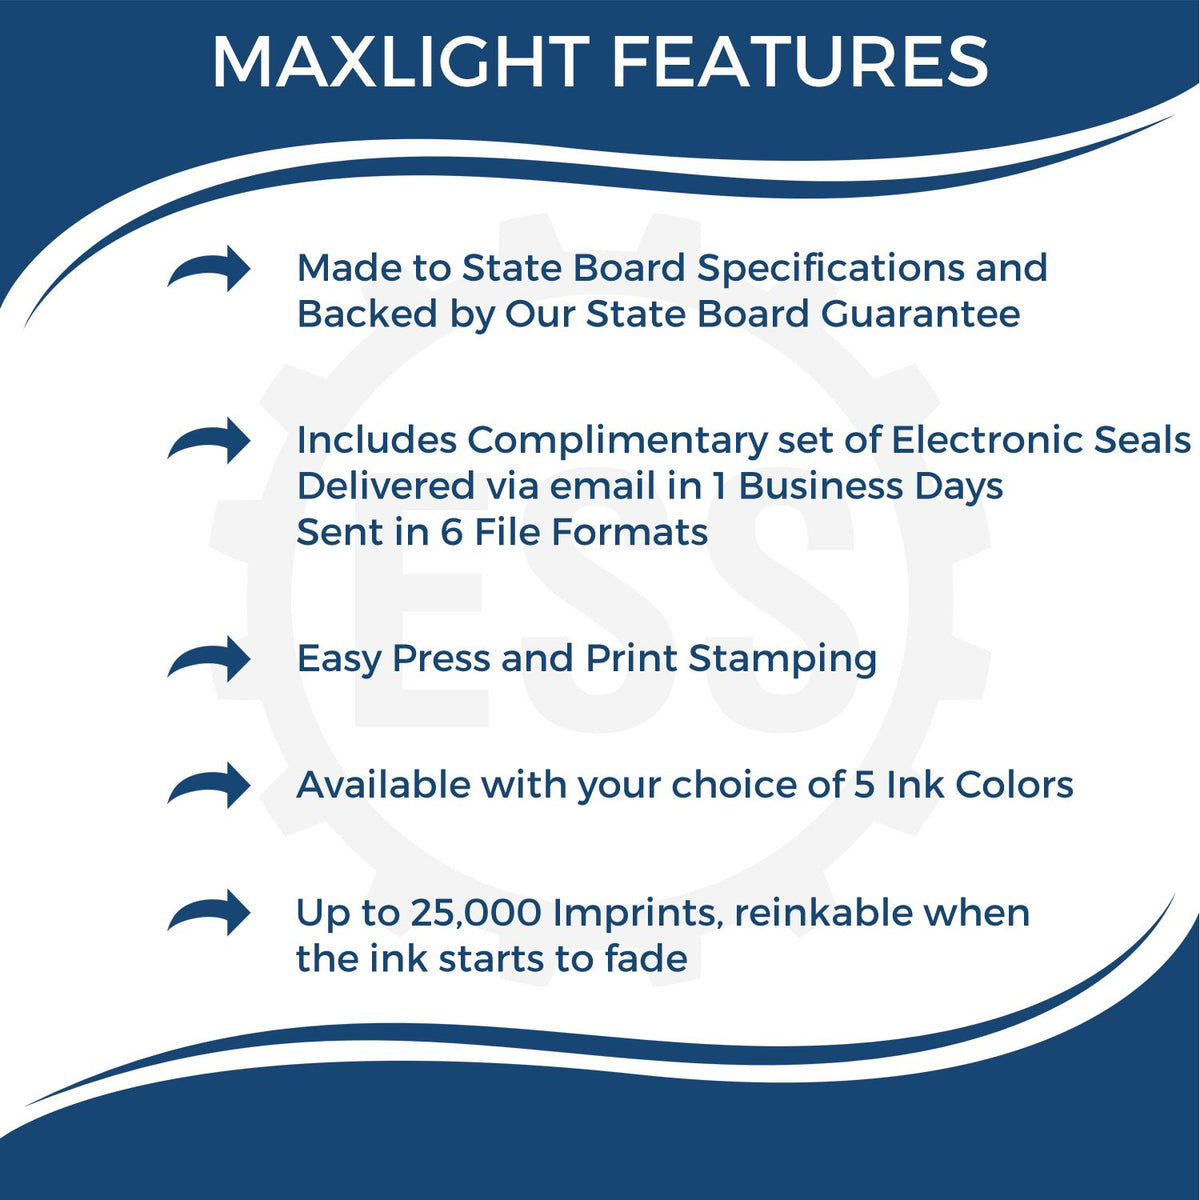 A picture of an infographic highlighting the selling points for the Premium MaxLight Pre-Inked New Mexico Landscape Architectural Stamp